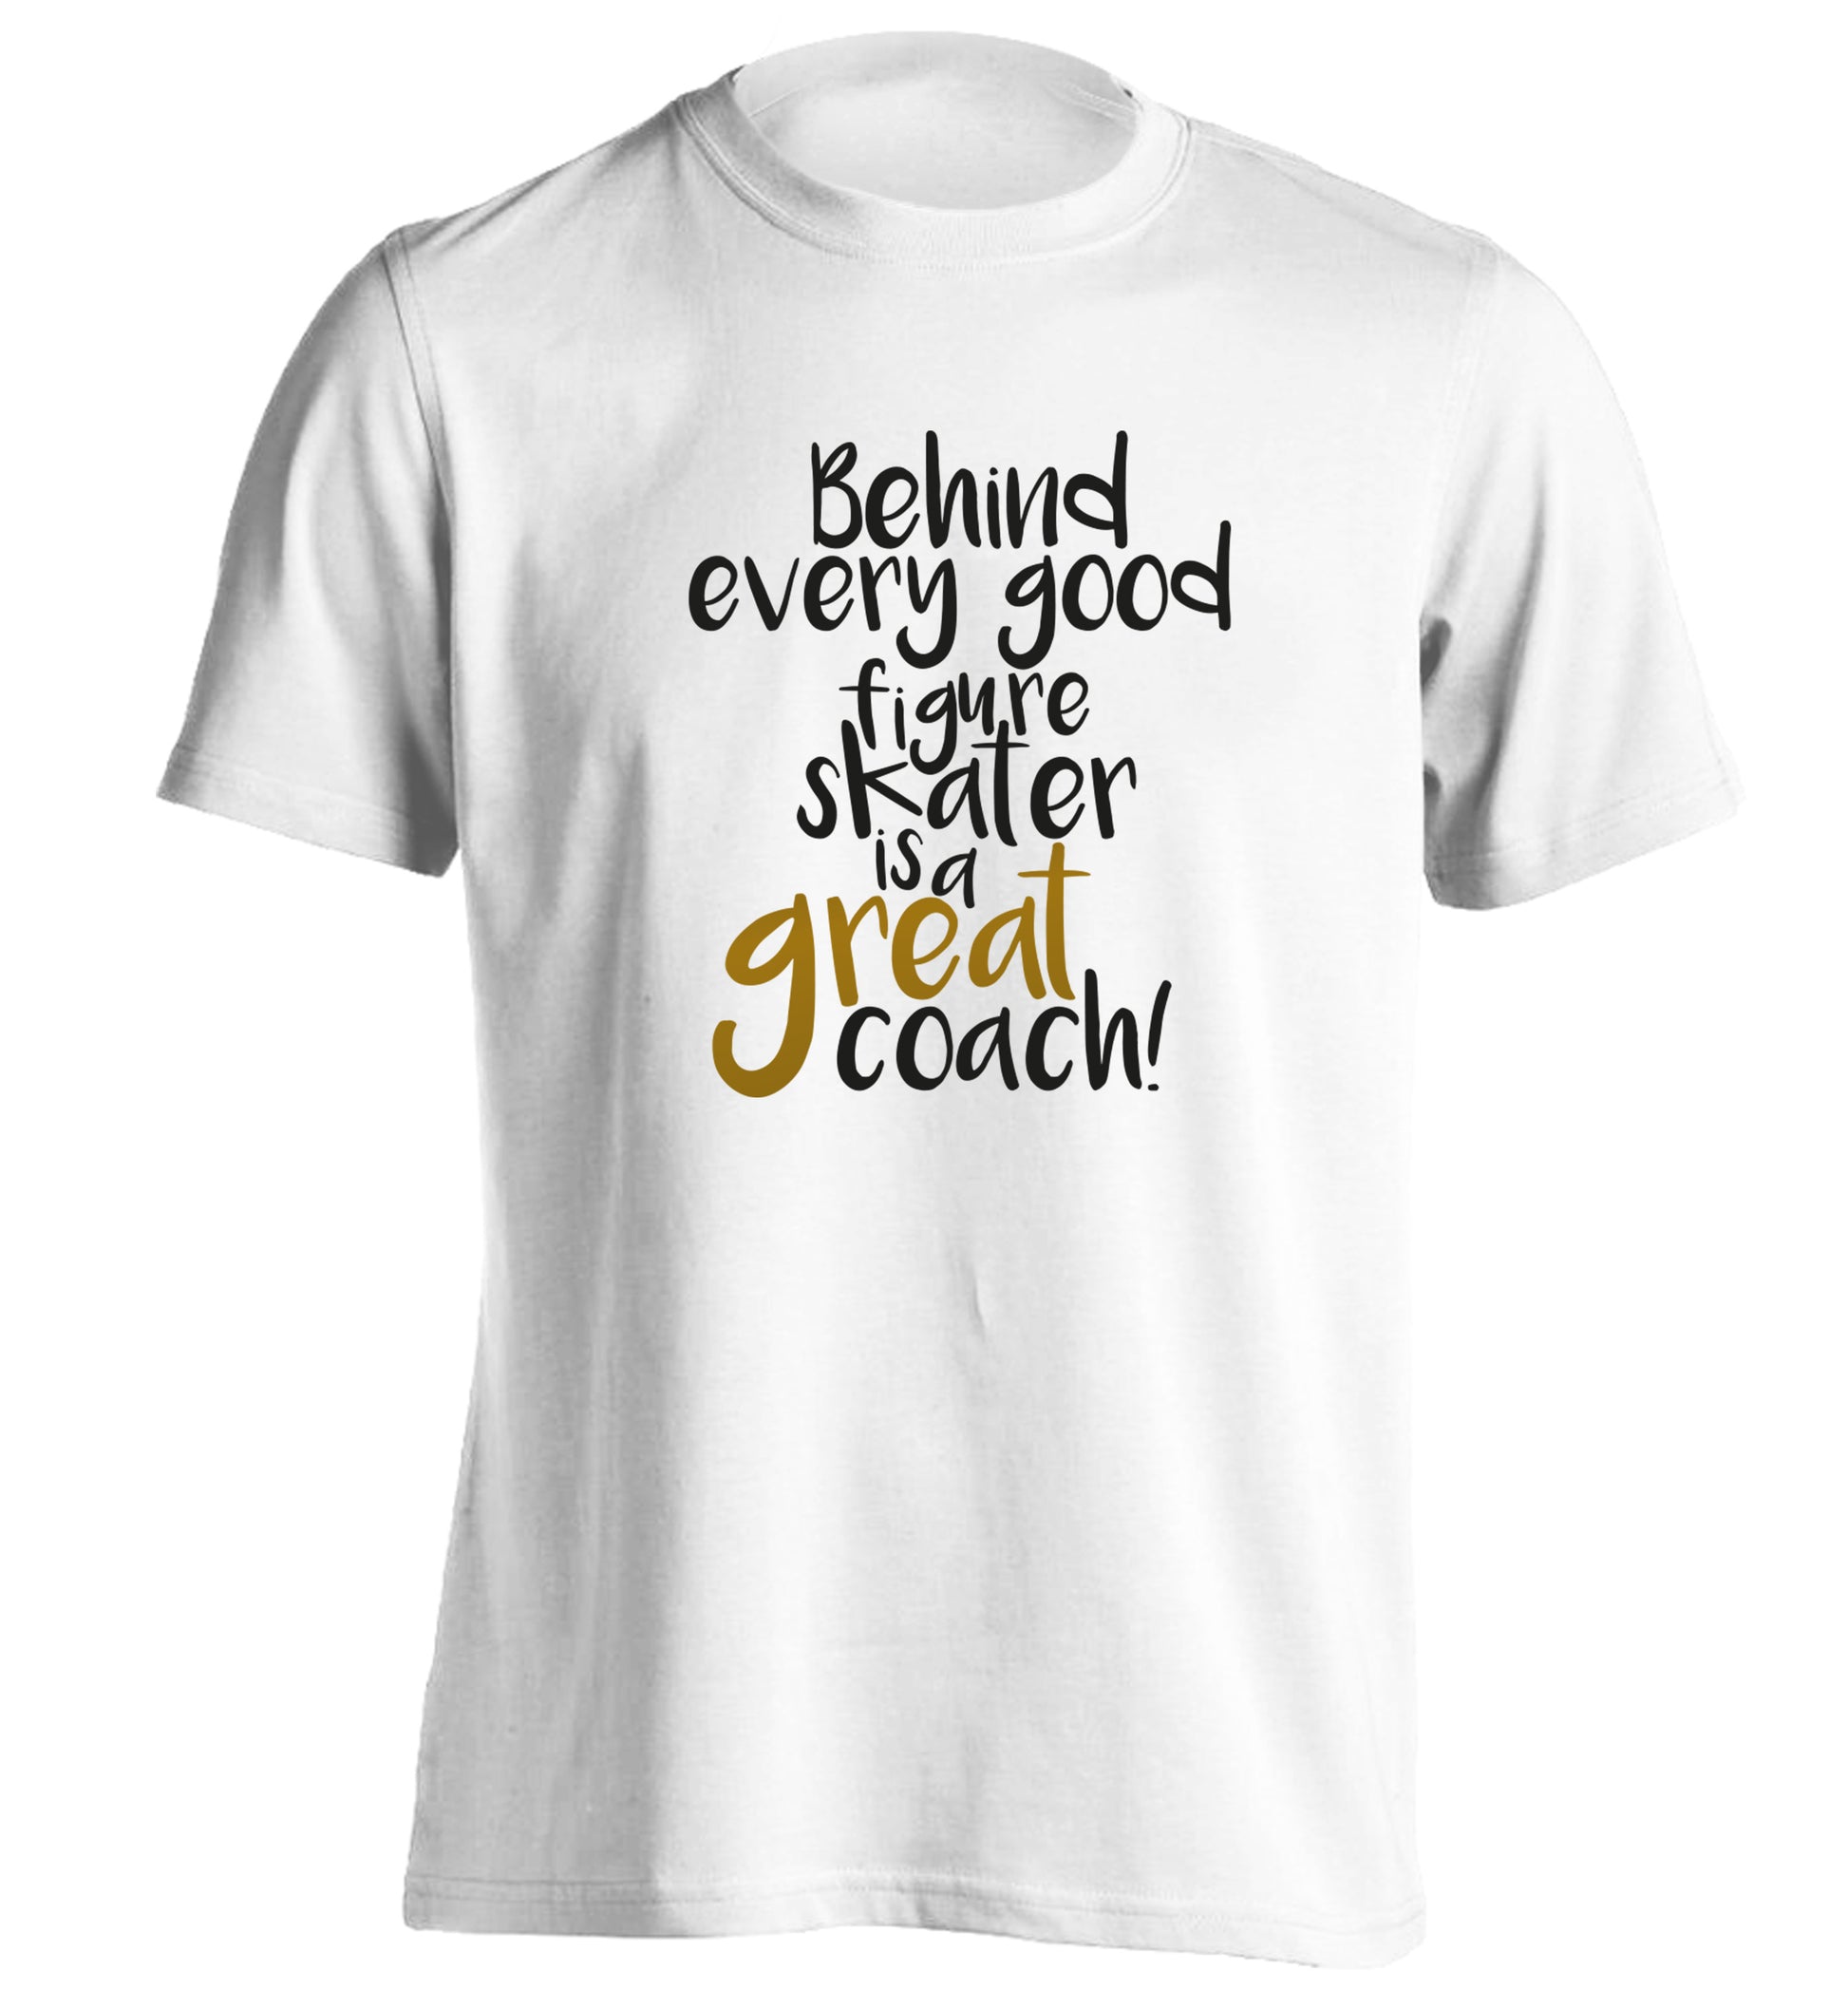 Behind every good figure skater is a great coach adults unisexwhite Tshirt 2XL